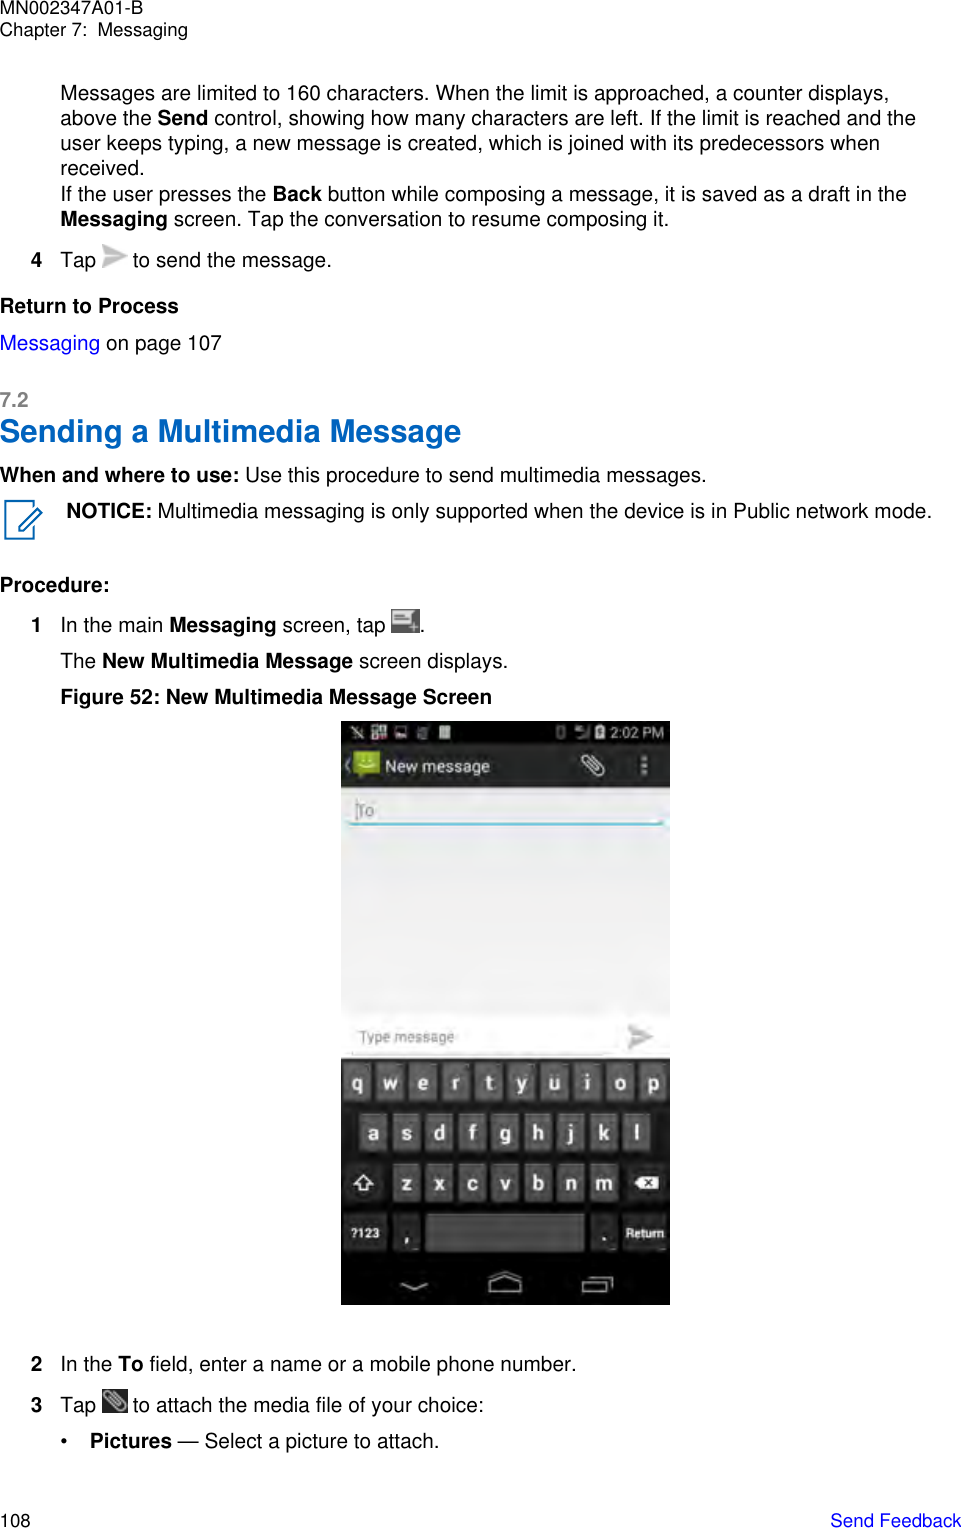 Messages are limited to 160 characters. When the limit is approached, a counter displays,above the Send control, showing how many characters are left. If the limit is reached and theuser keeps typing, a new message is created, which is joined with its predecessors whenreceived.If the user presses the Back button while composing a message, it is saved as a draft in theMessaging screen. Tap the conversation to resume composing it.4Tap   to send the message.Return to ProcessMessaging on page 1077.2Sending a Multimedia MessageWhen and where to use: Use this procedure to send multimedia messages.NOTICE: Multimedia messaging is only supported when the device is in Public network mode.Procedure:1In the main Messaging screen, tap  .The New Multimedia Message screen displays.Figure 52: New Multimedia Message Screen2In the To field, enter a name or a mobile phone number.3Tap   to attach the media file of your choice:•Pictures — Select a picture to attach.MN002347A01-BChapter 7:  Messaging108   Send Feedback